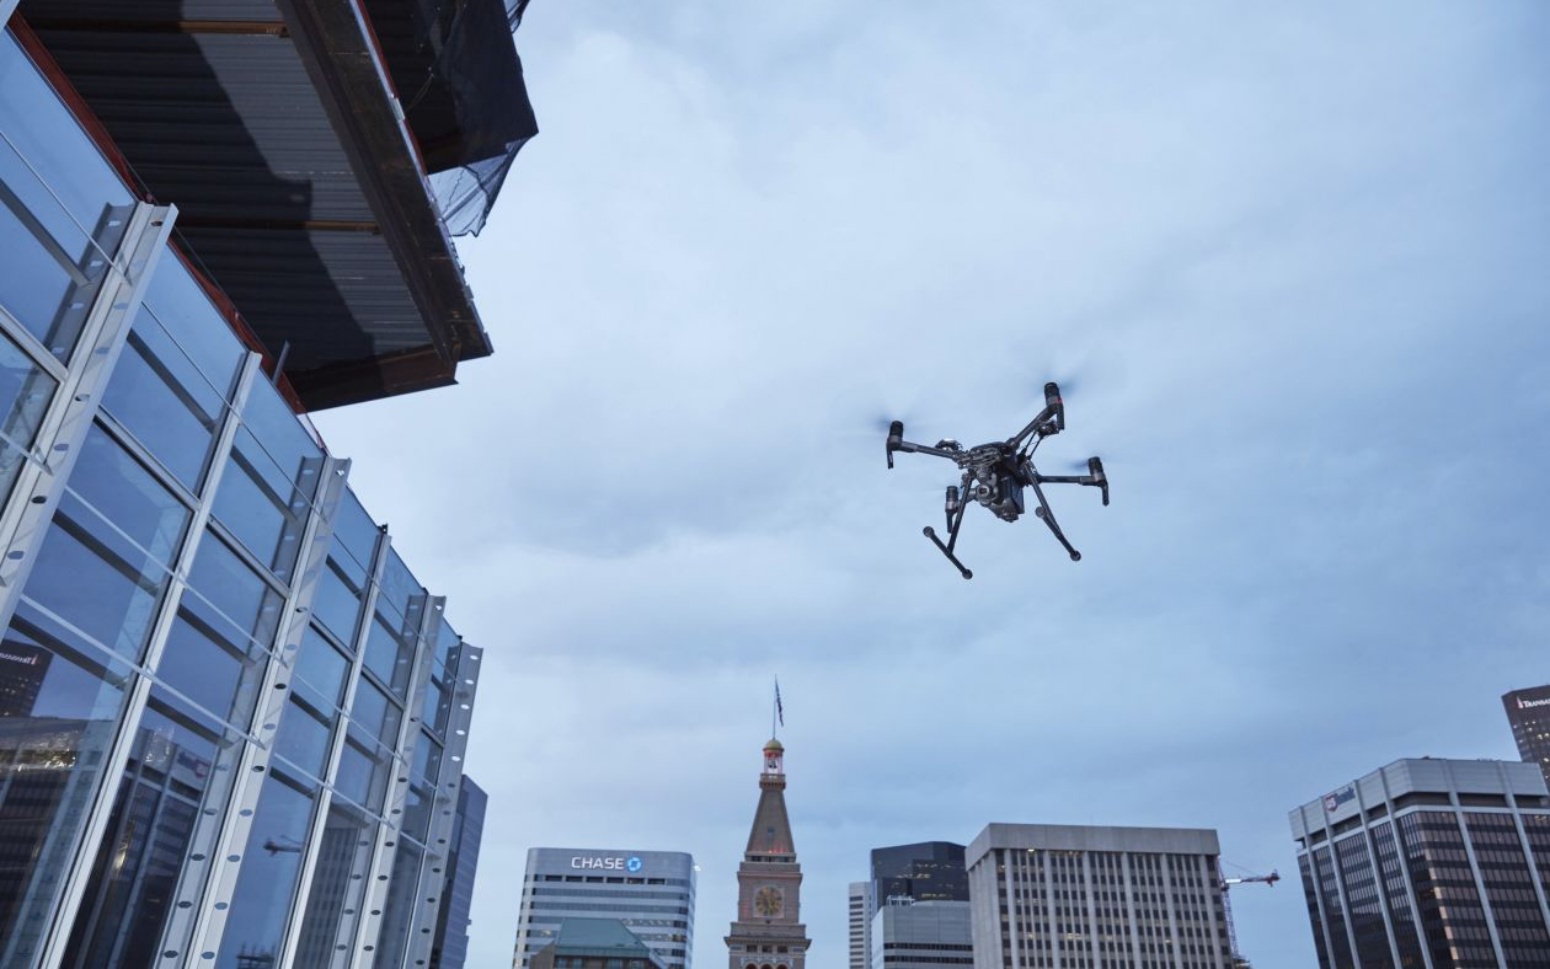 To speed up drone identification rules, the FAA launches a test program